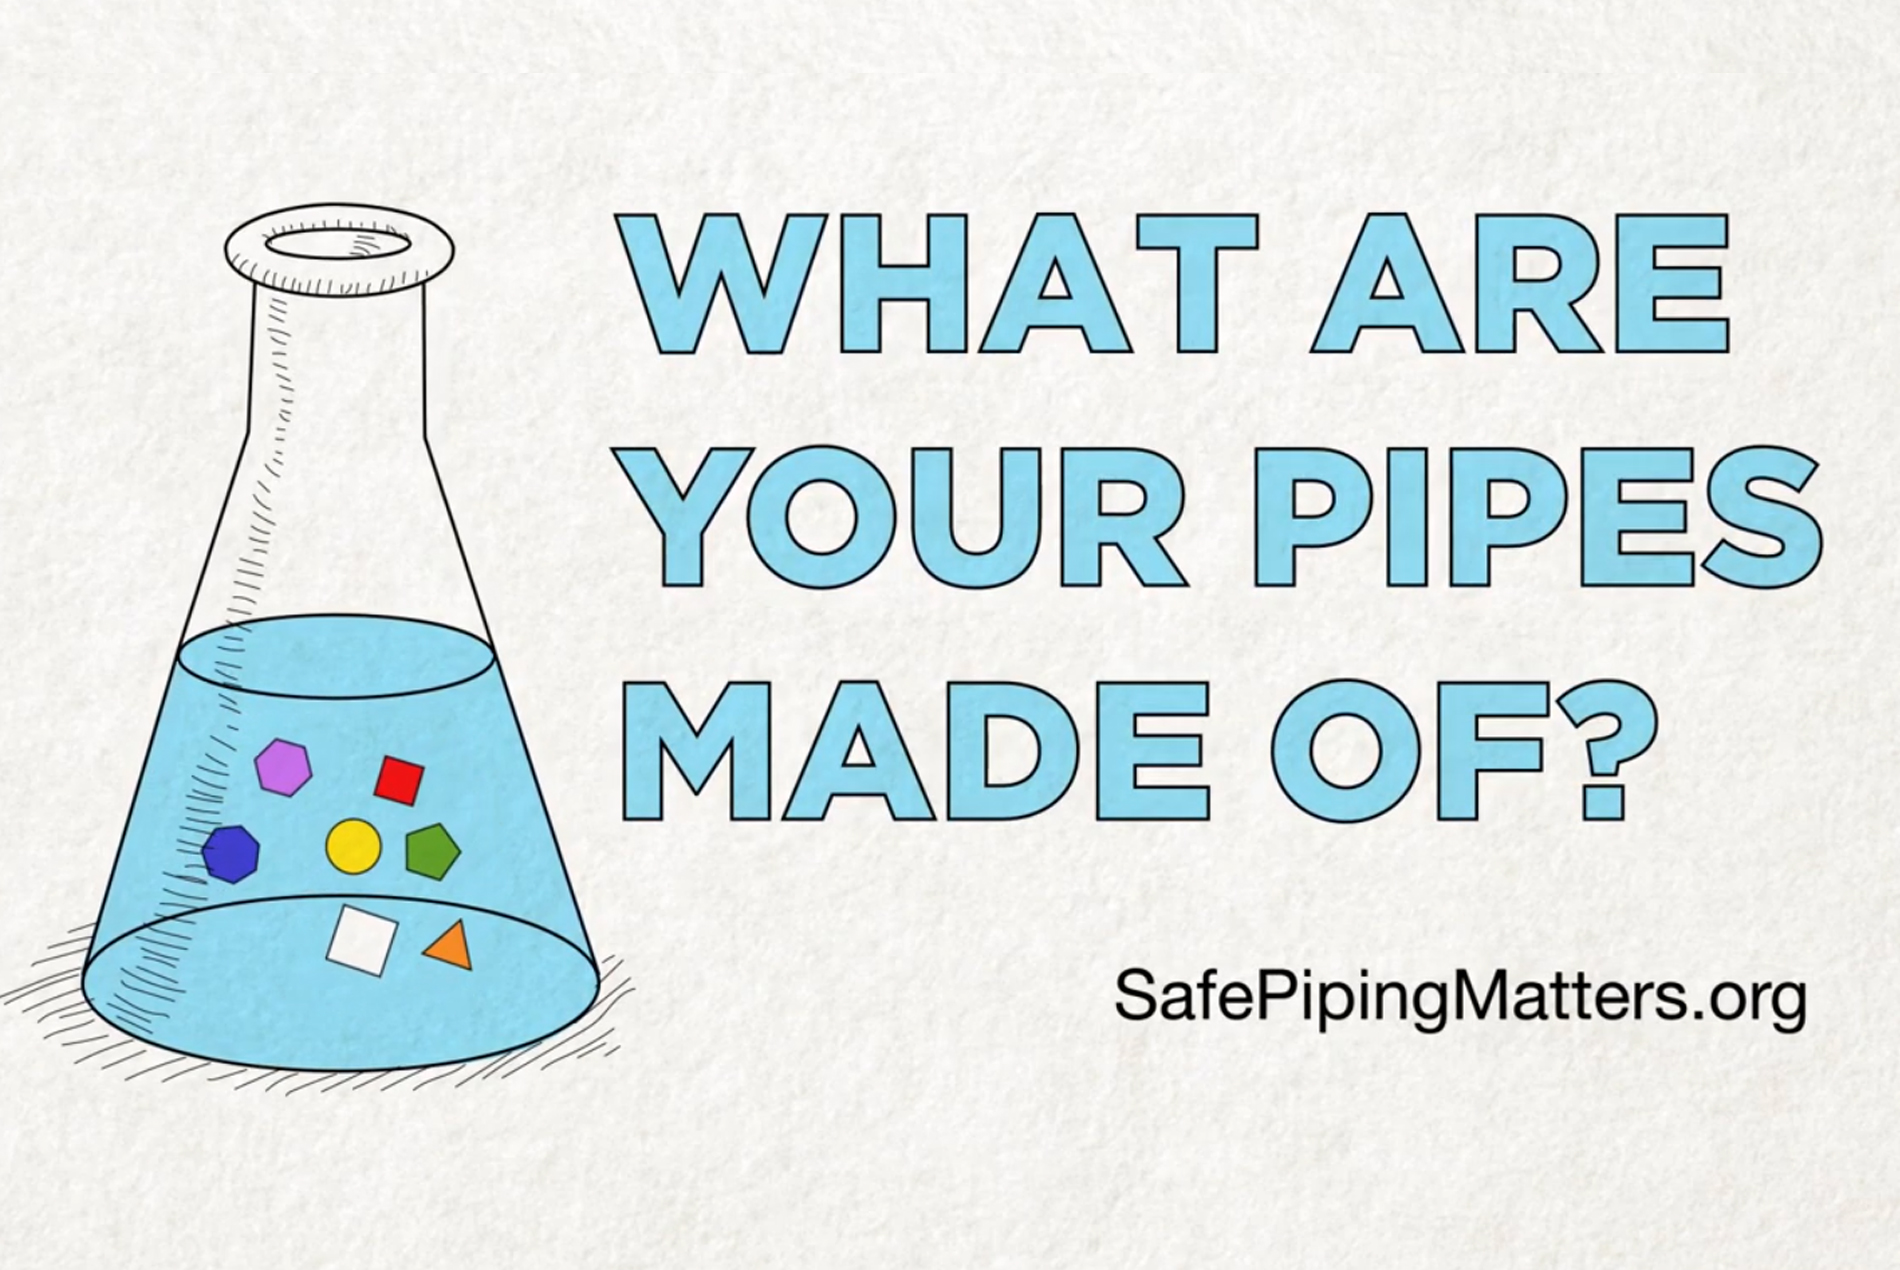 New Video Highlights Health Risks Associated with Piping Materials